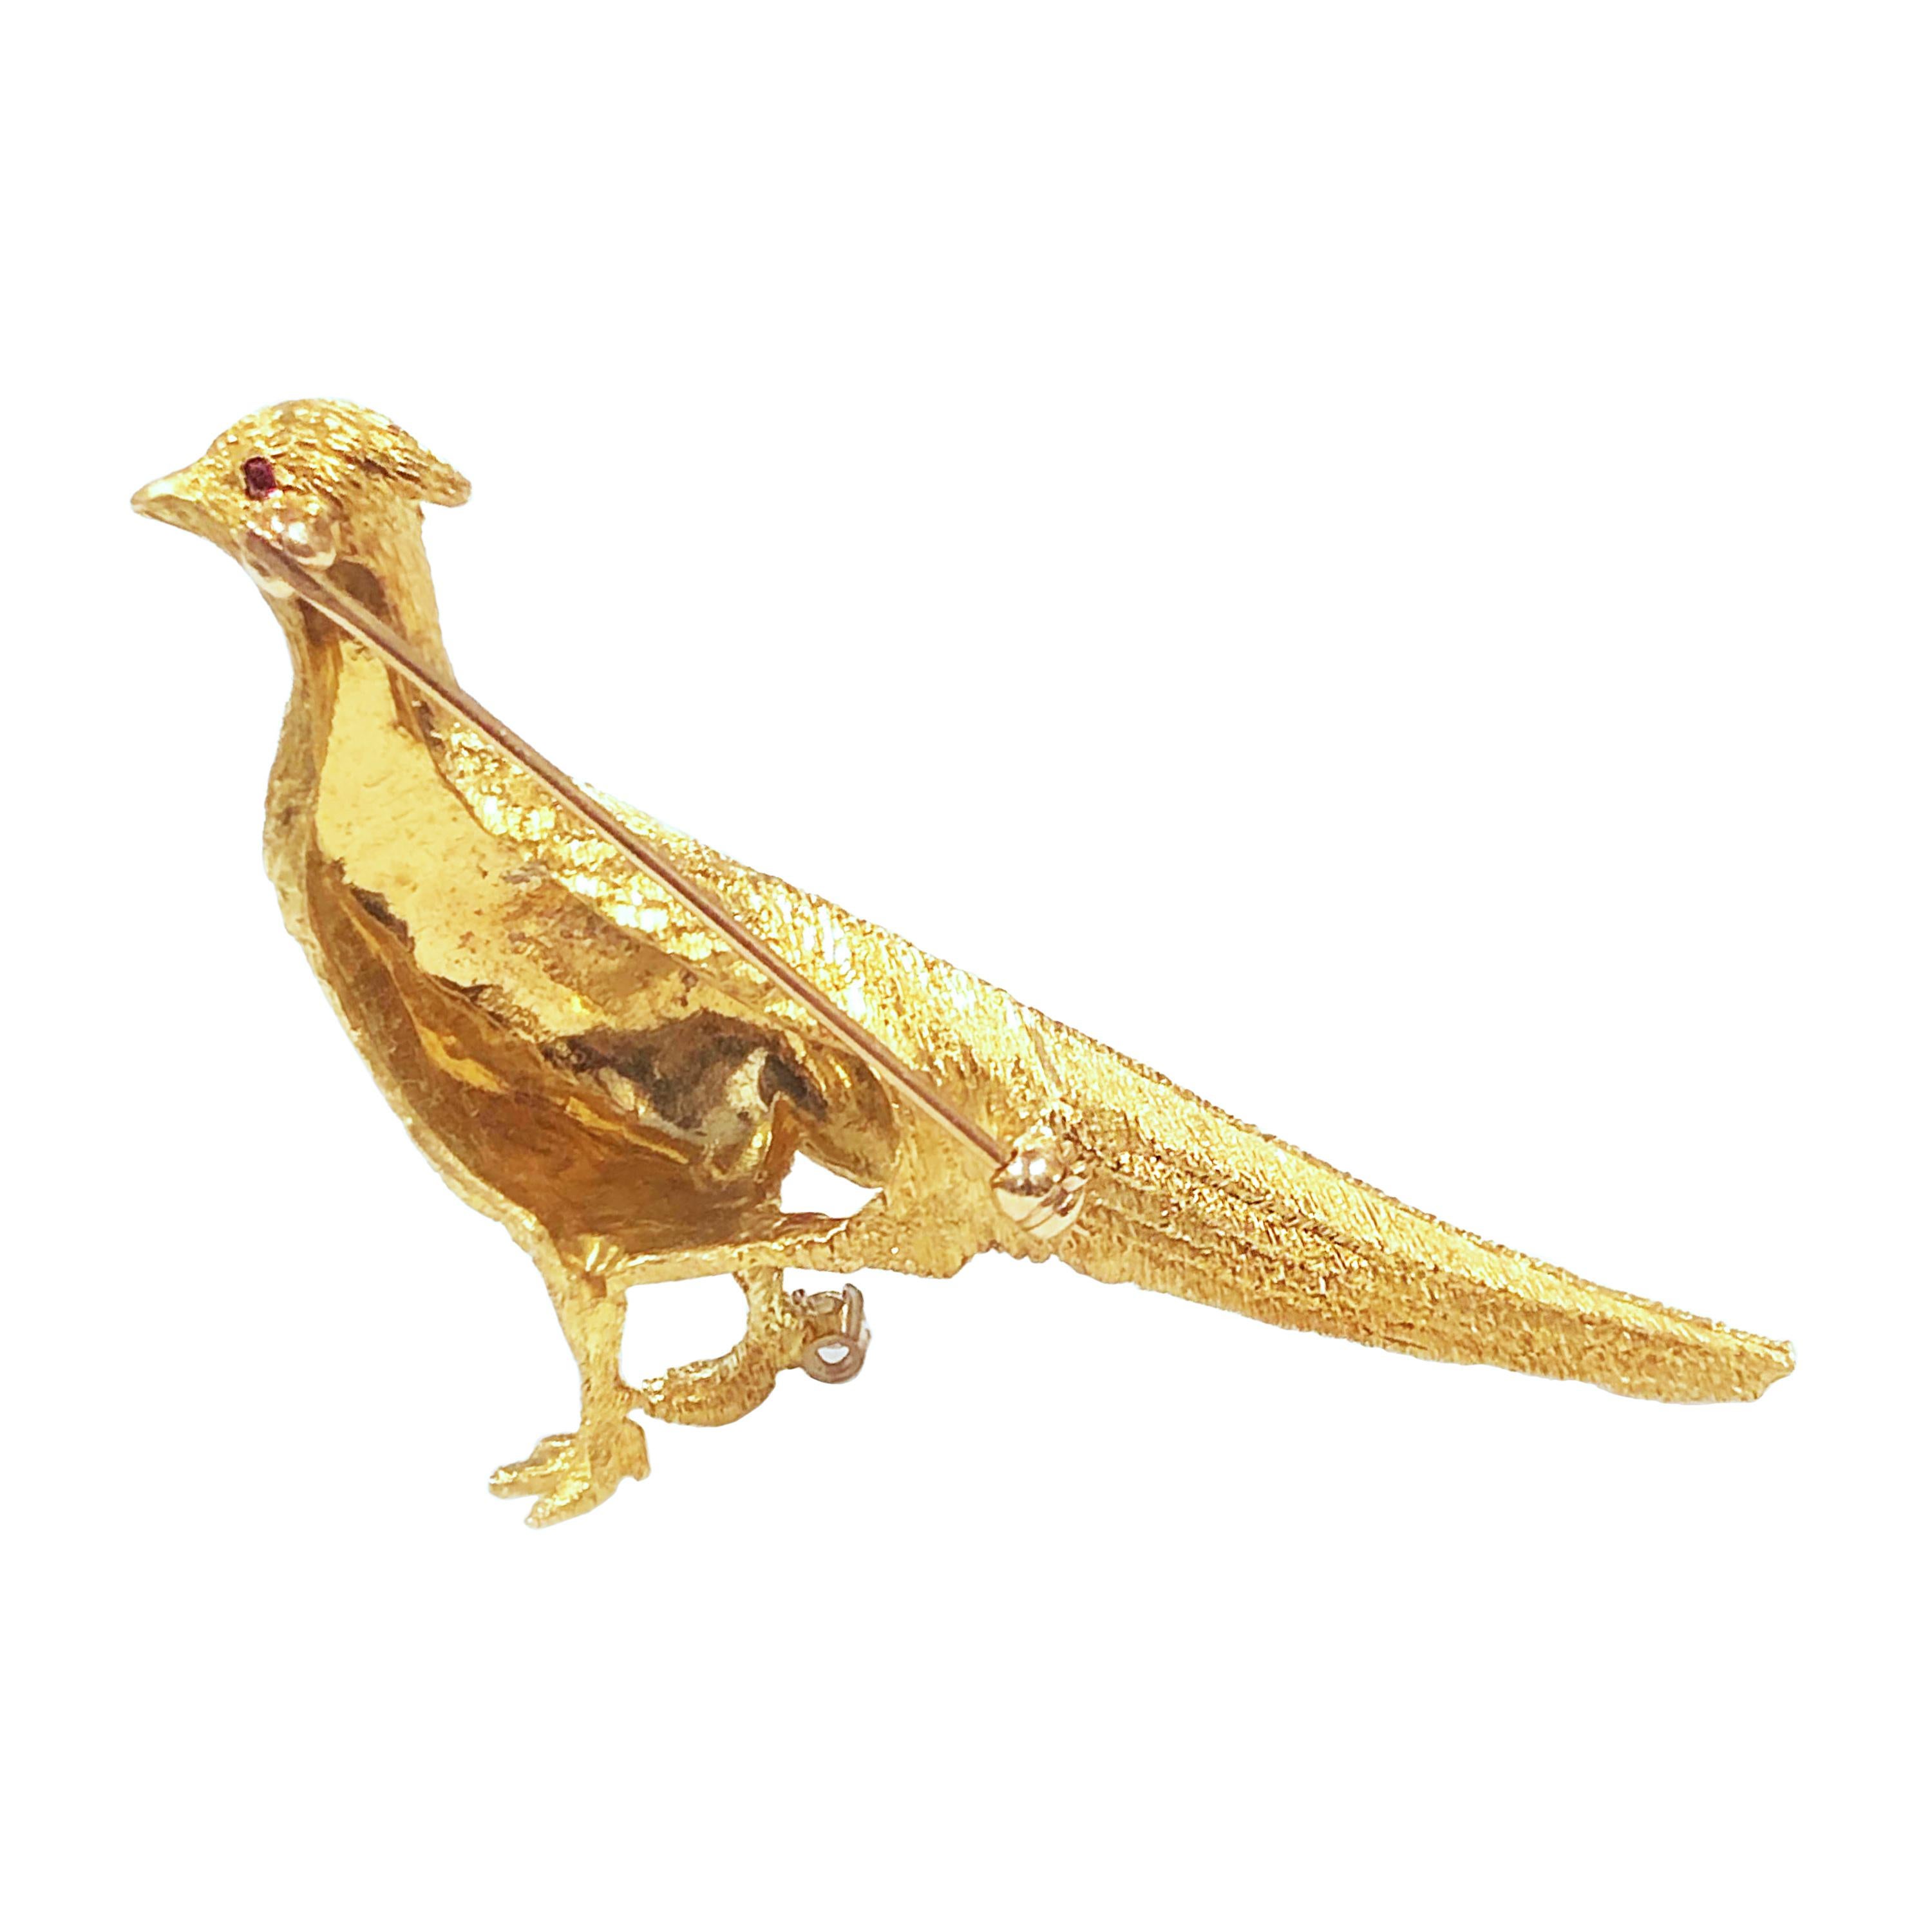 Circa 1980 Tiffany & Company 18K yellow Gold Pheasant Bird Brooch, measuring 2 1/2 inches in length X 1 inch and weighing 16.8 Grams. Hand finished with a Detailed textured Finish. Set with a Ruby Eye and a Diamond at the Foot. Comes in a Tiffany